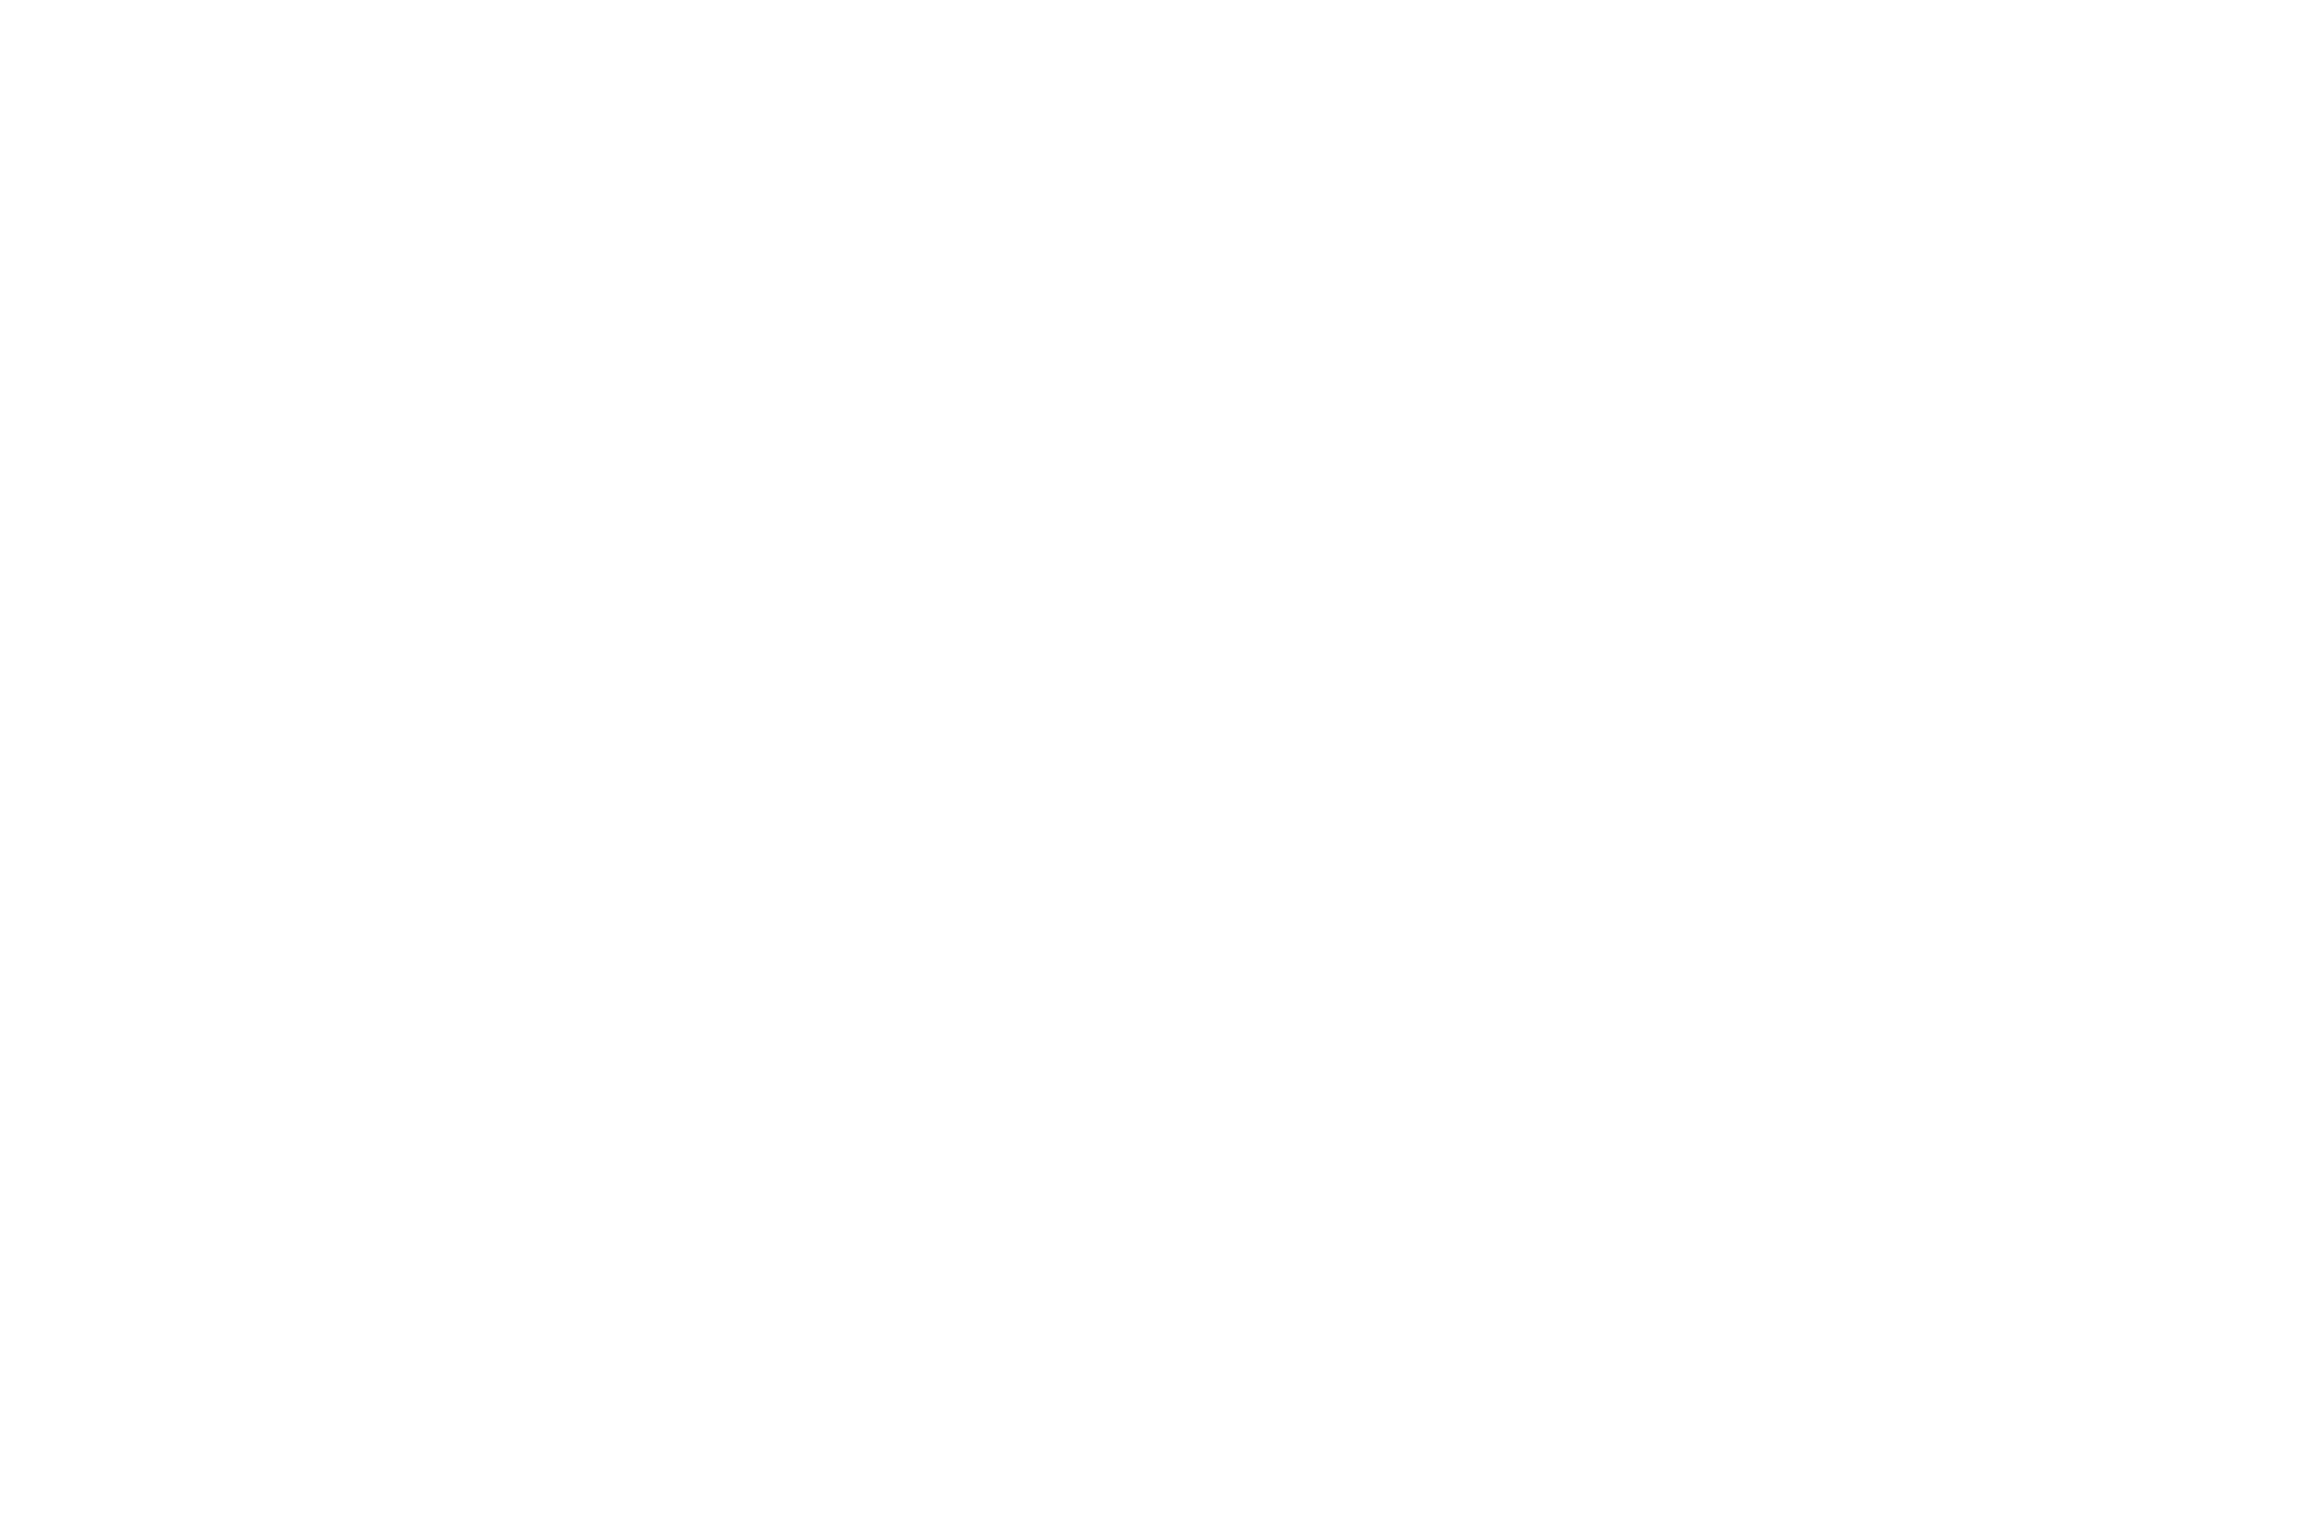 Fortier CPA Inc.